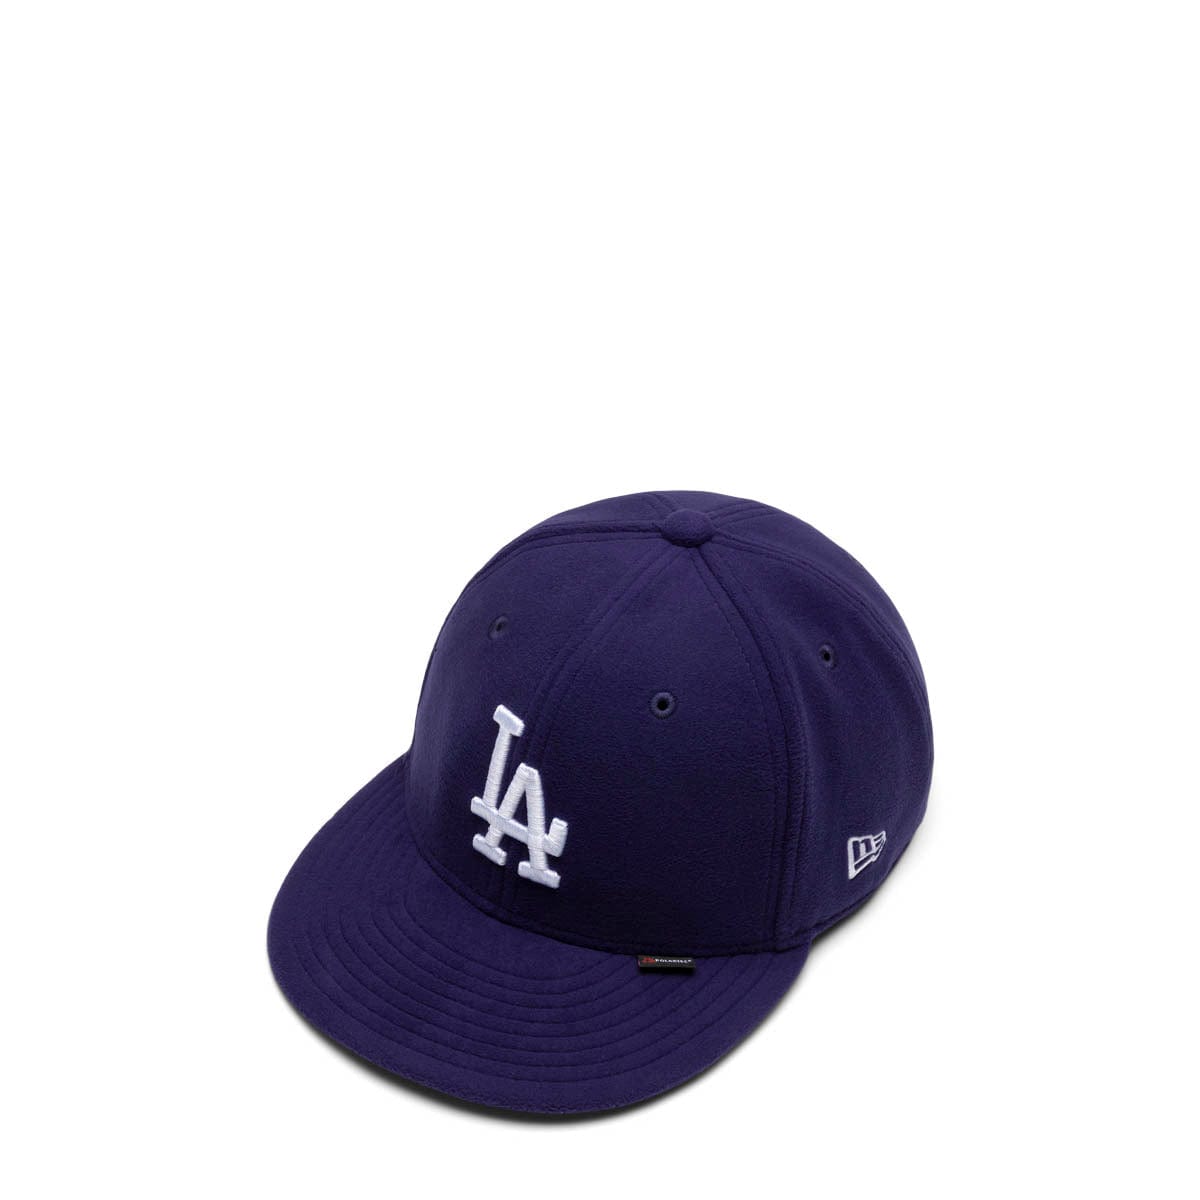 Bodega Store Accessories - HATS - Snapback-Fitted Hat DODGERS POLARTEC 5950 10160 LOS ANGELES DODGERS NAVY